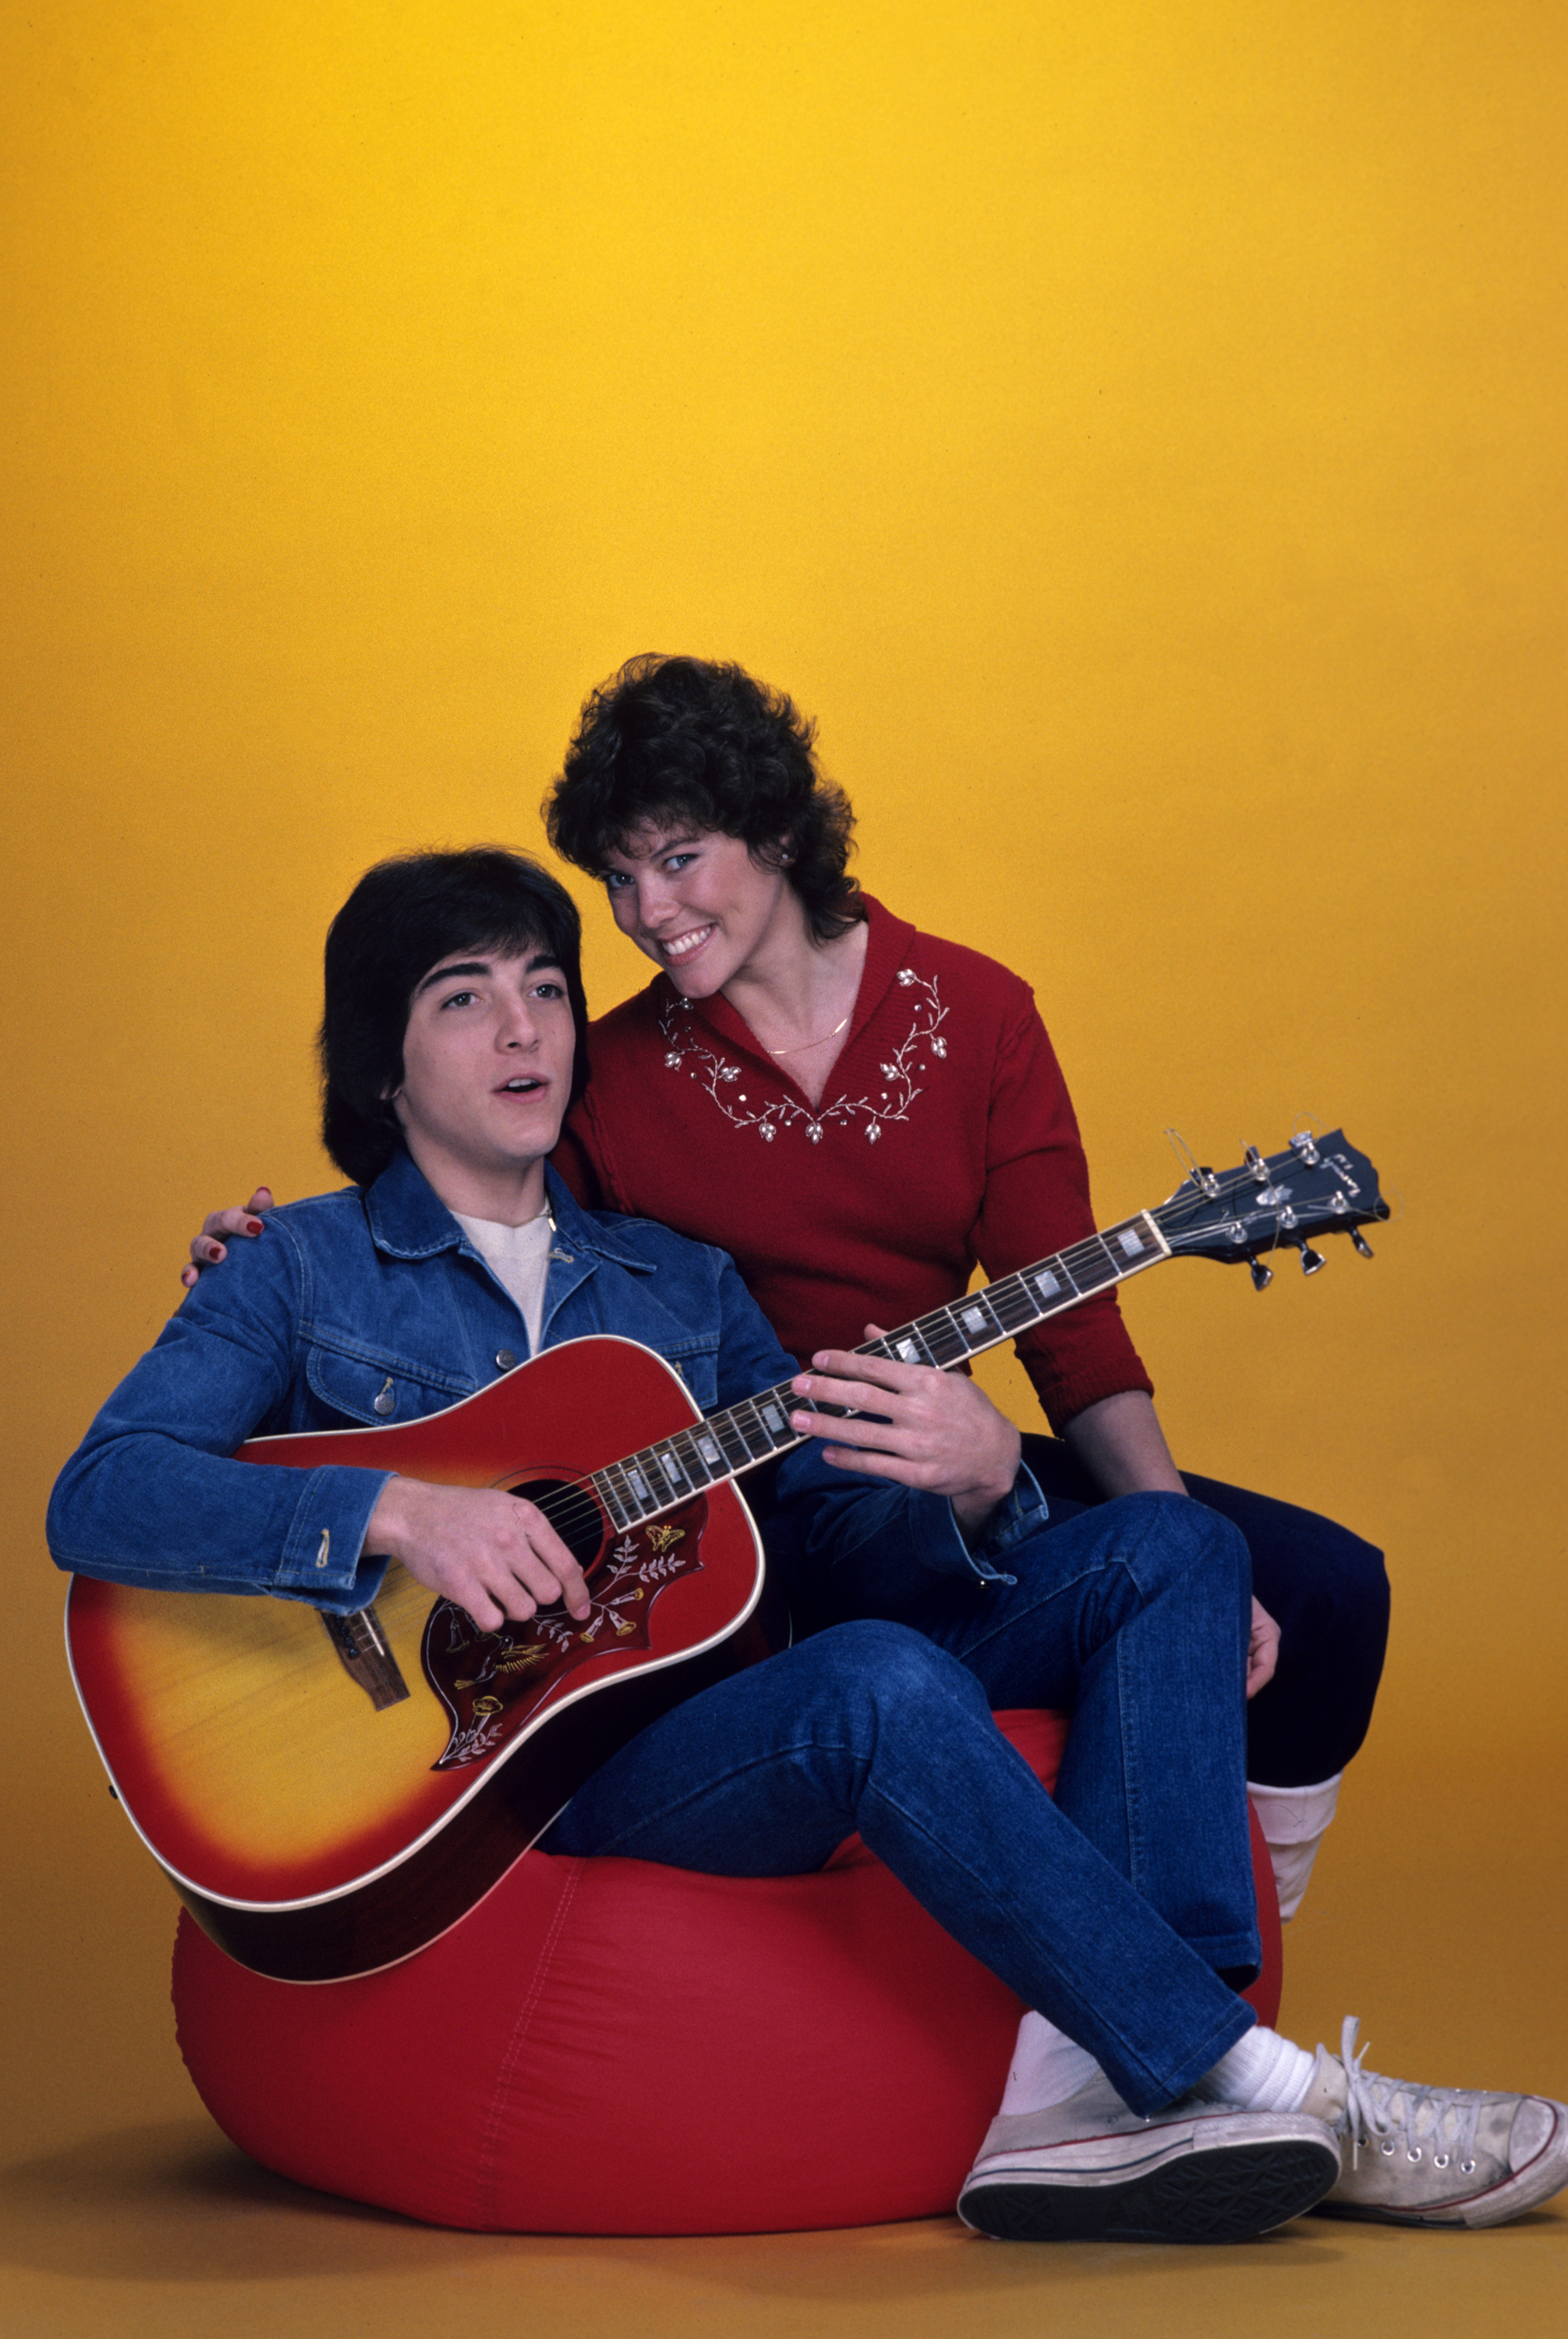 Scott Baio and Erin Moran on the set of "Happy Days" on March 23,1982 | Source: Getty Images